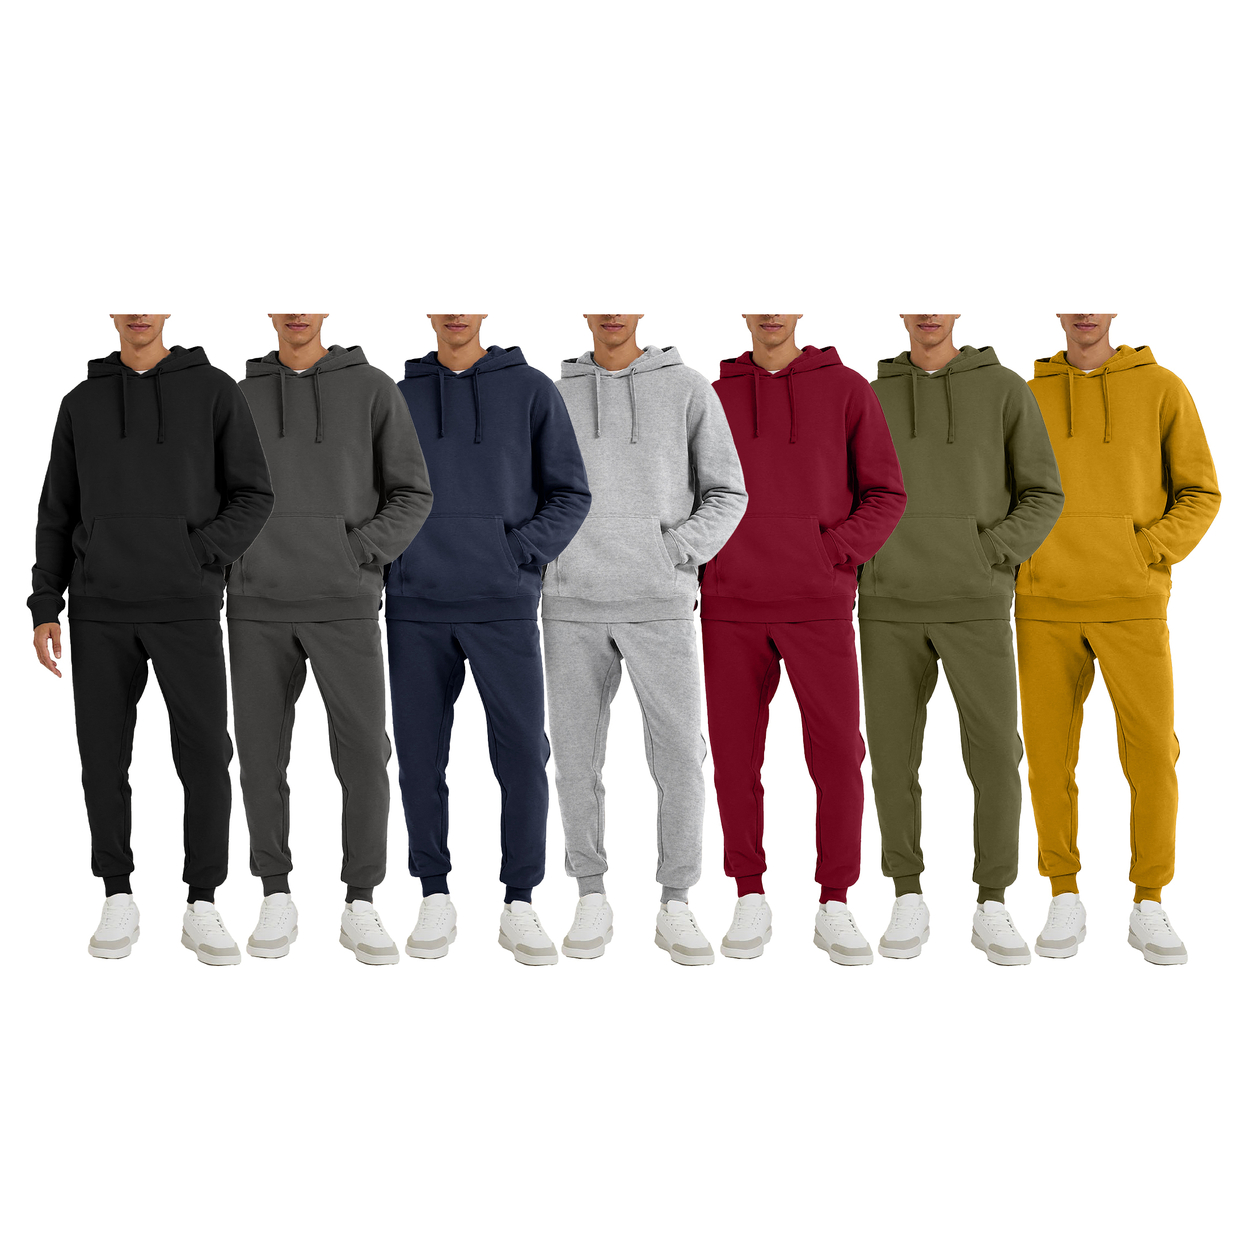 Multi-Pack: Men's Big & Tall Athletic Active Jogging Winter Warm Fleece Lined Pullover Tracksuit Set - Charcoal, 1-pack, 3xl